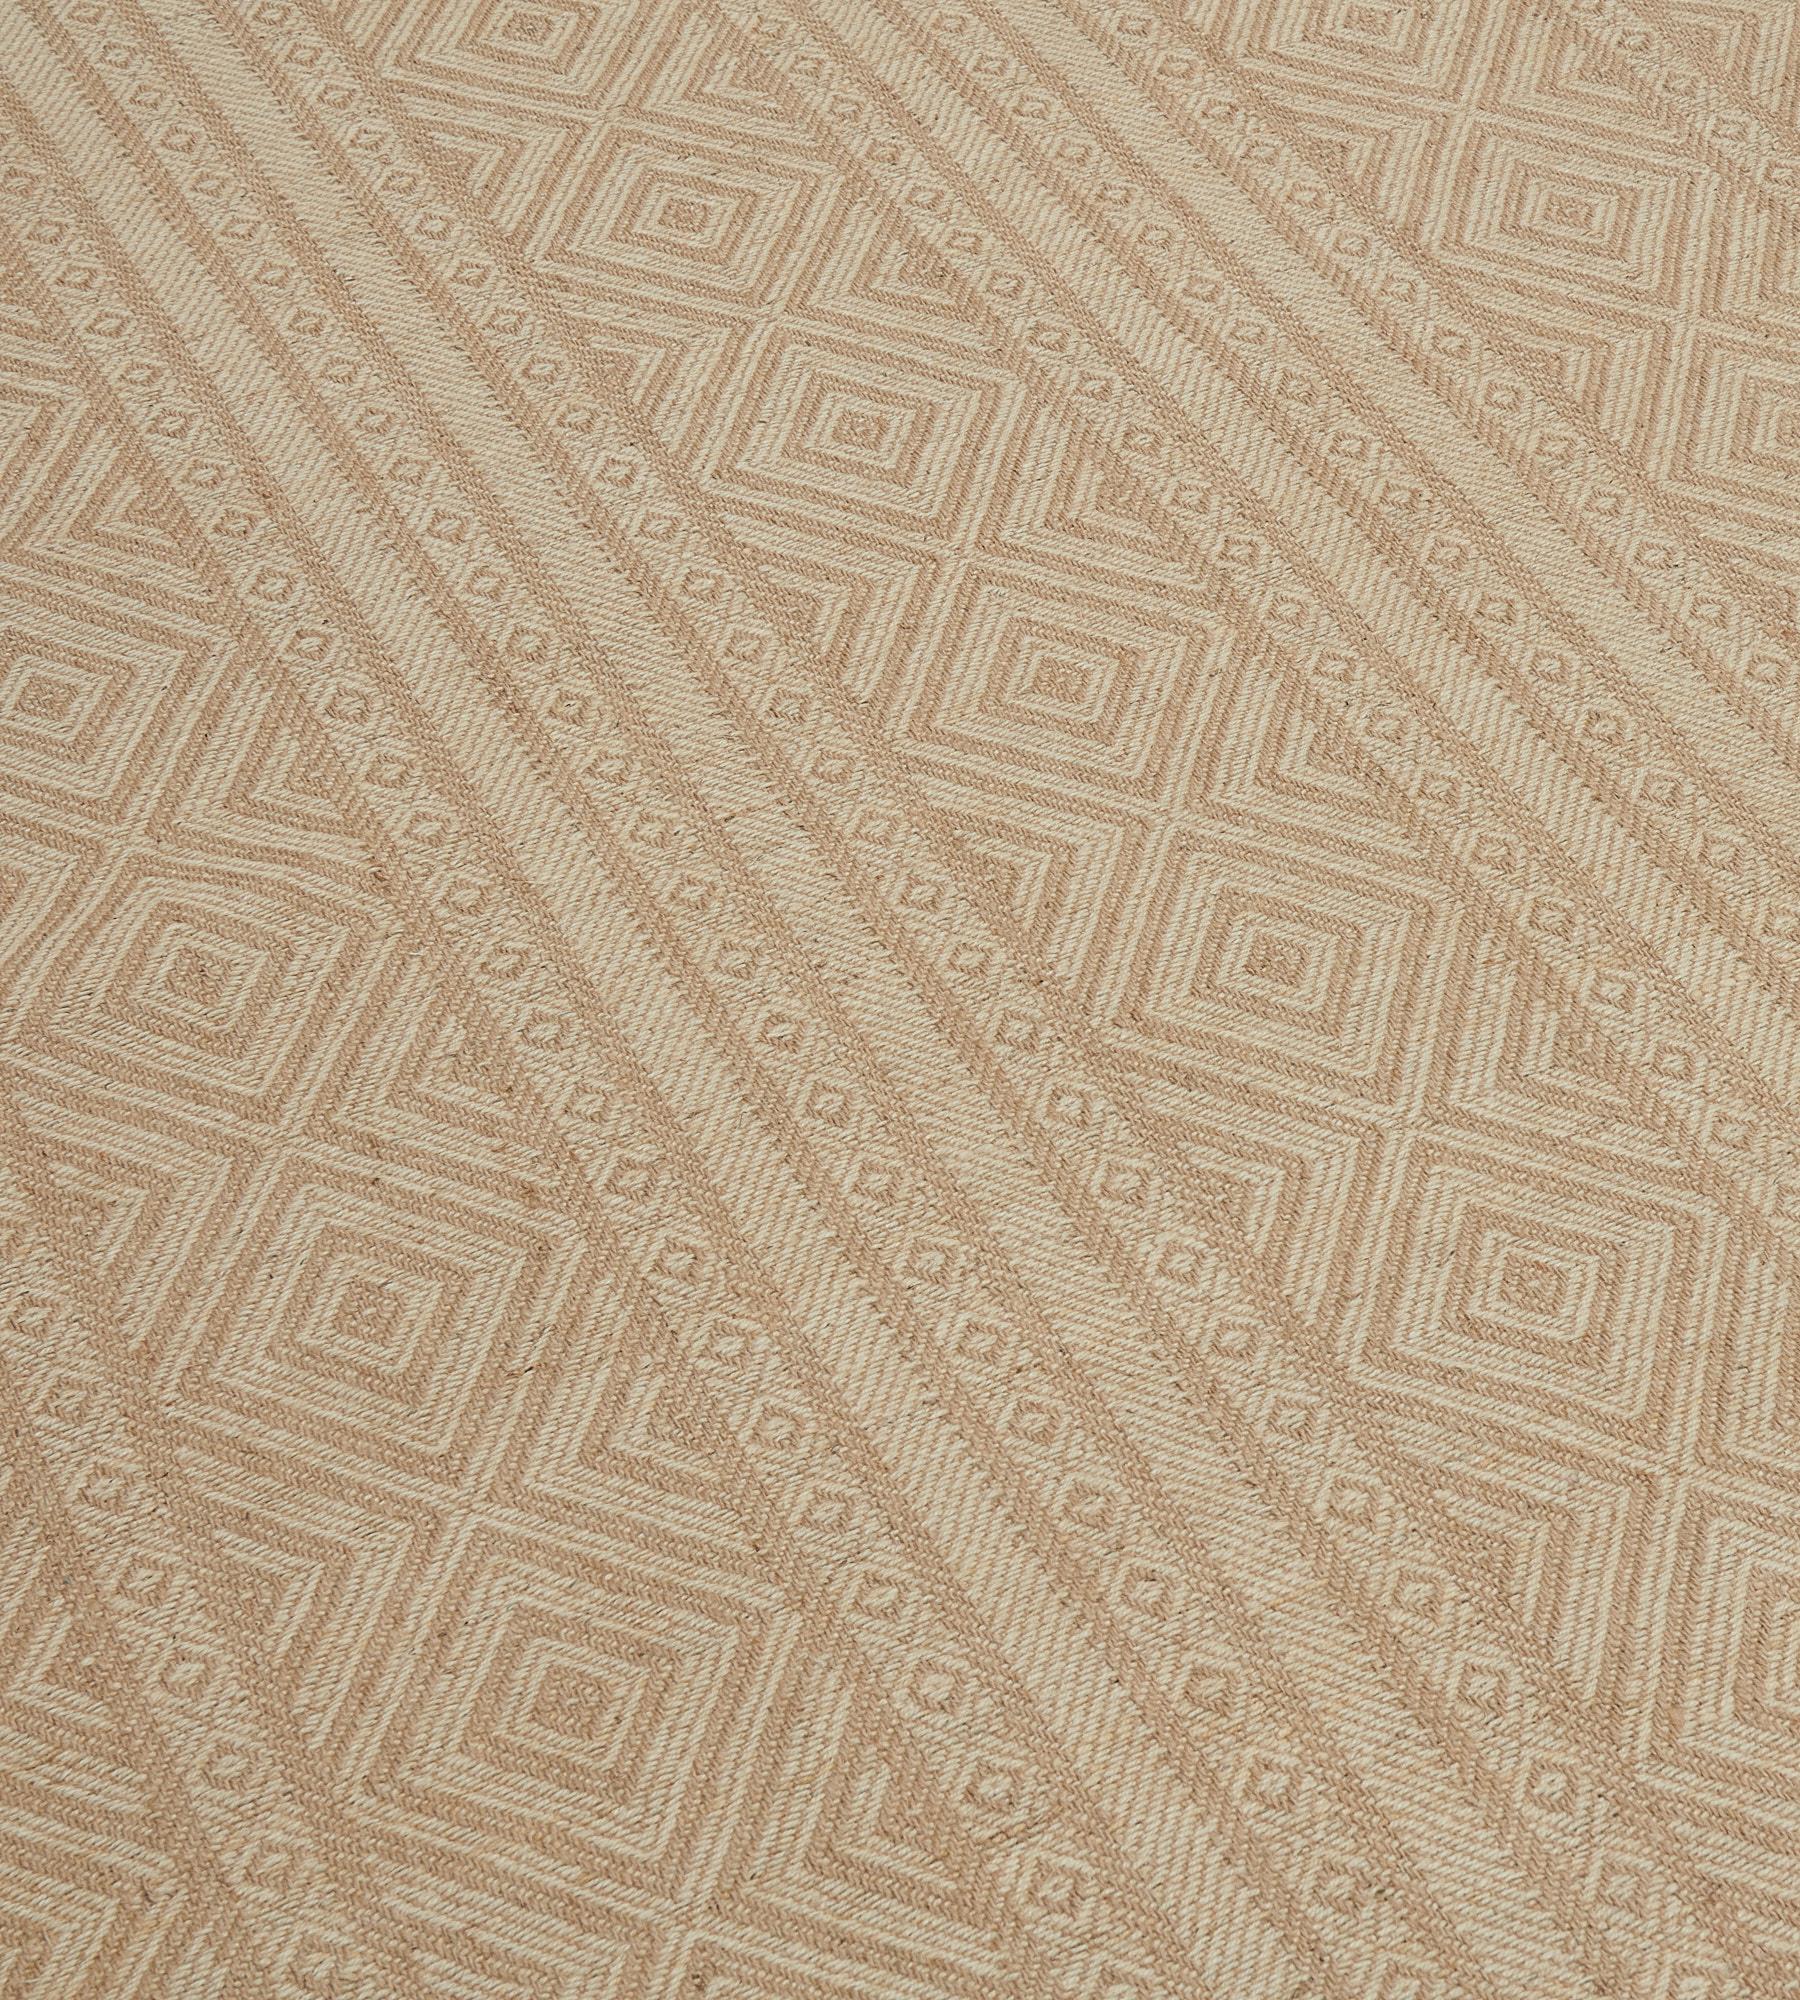 Part of the Mansour Modern collection, this design is handwoven by master weavers using the finest quality techniques and materials.